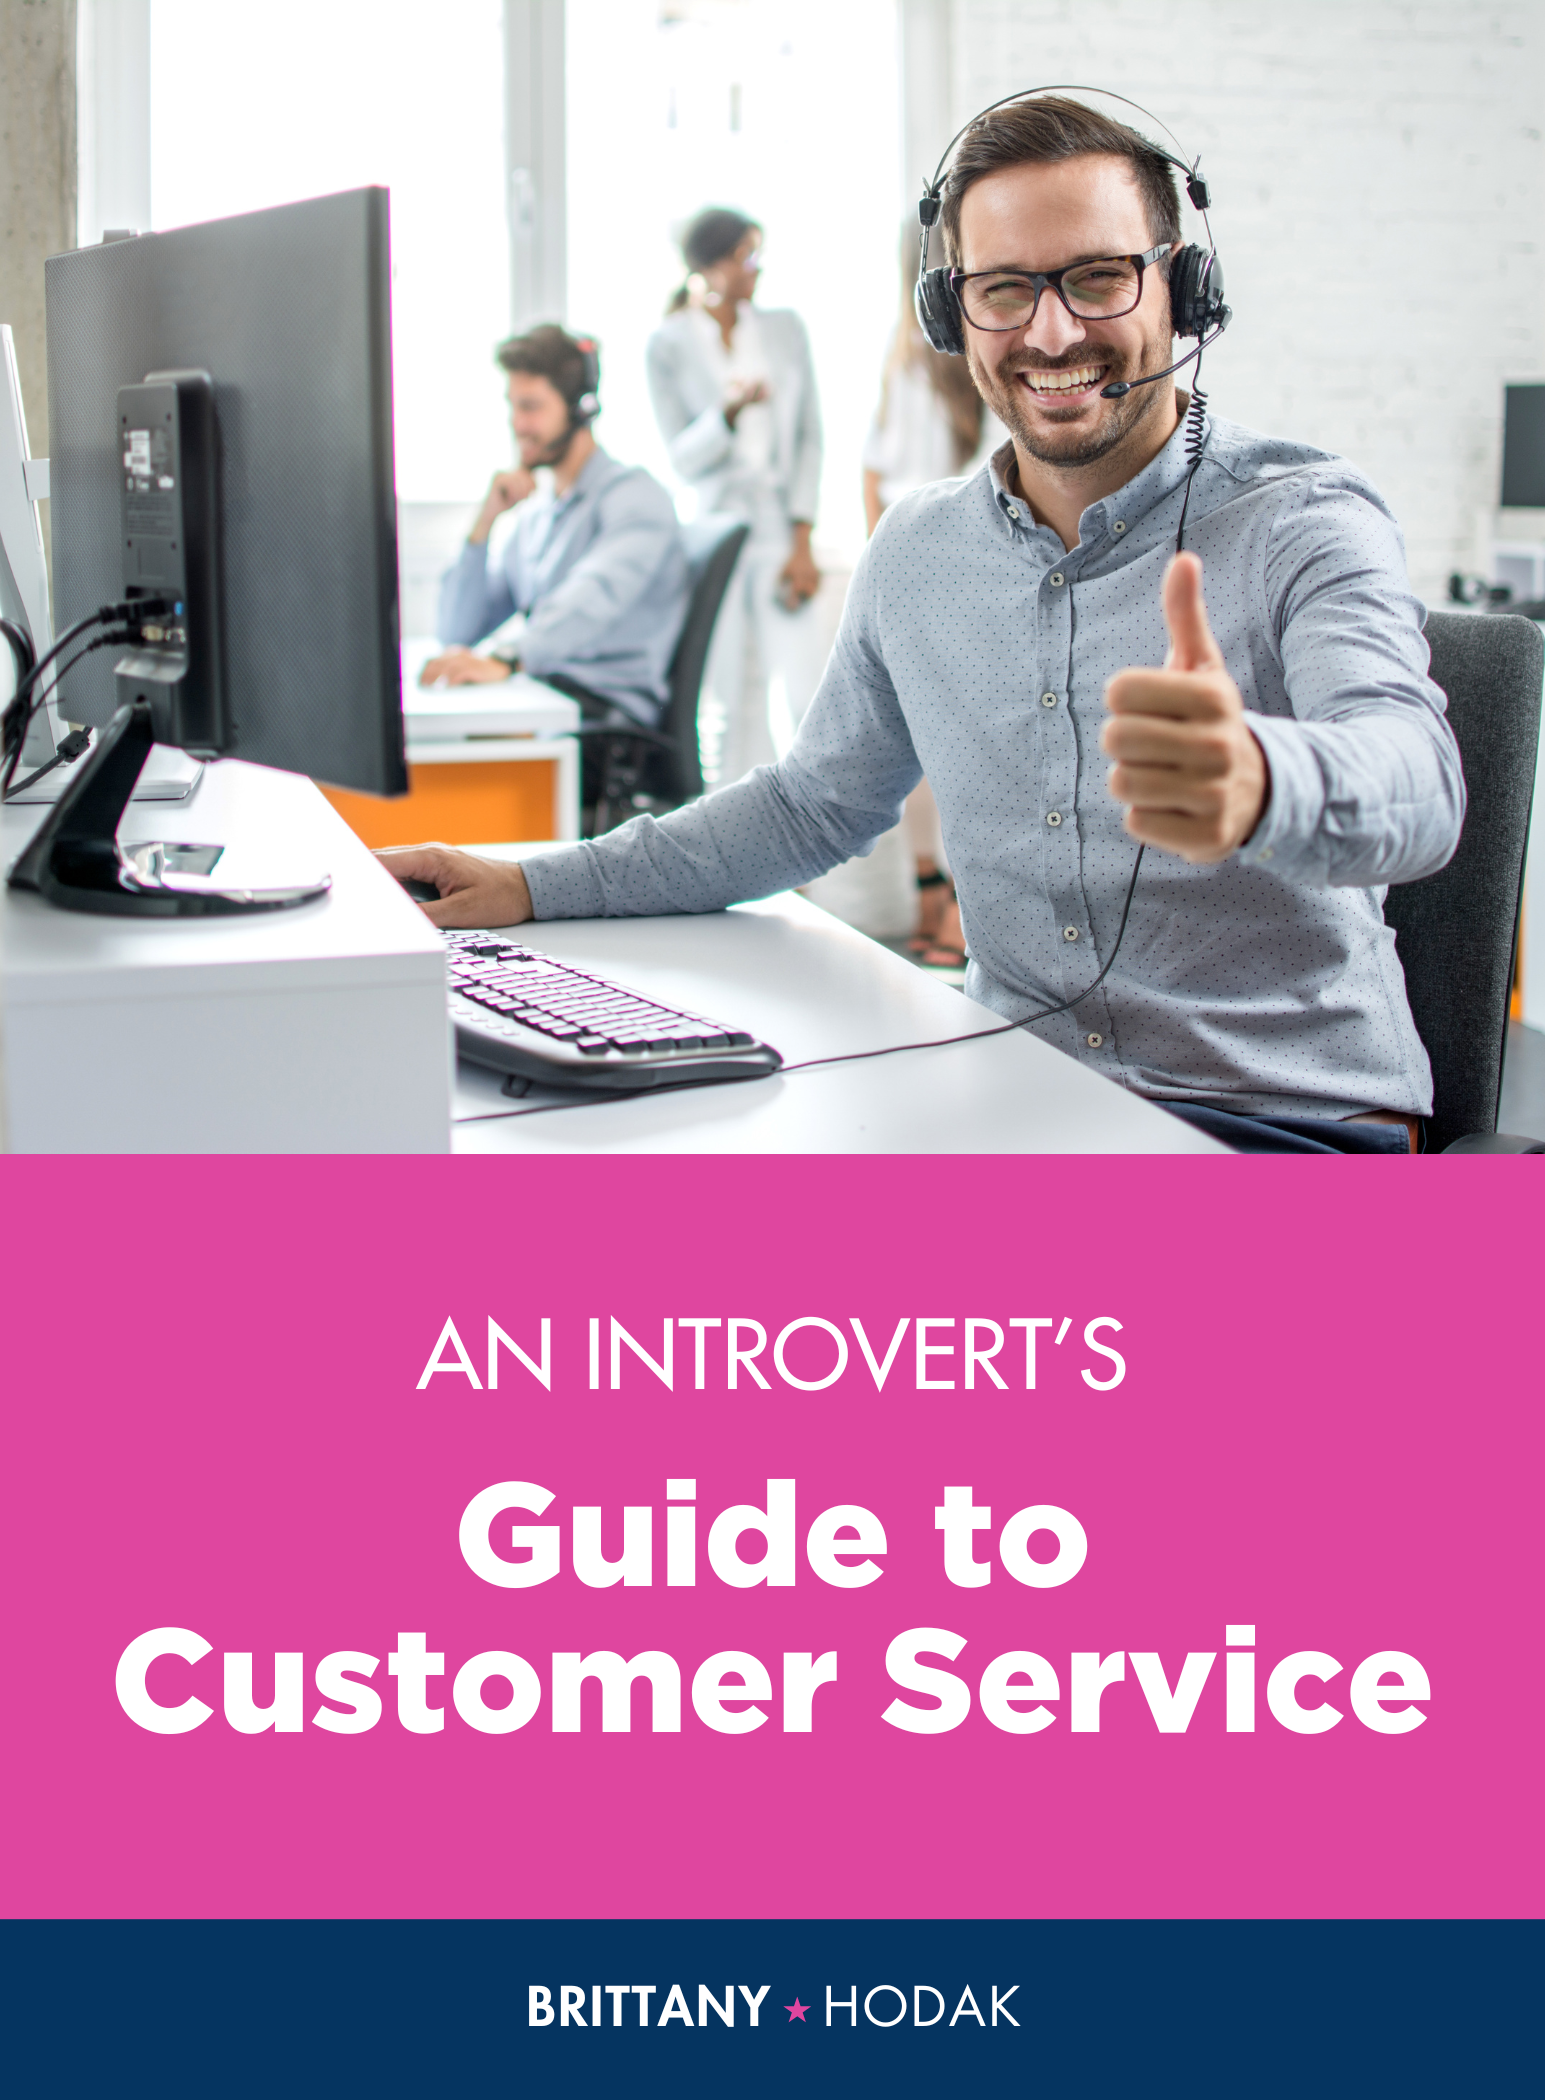 An Introvert's Guide to Customer Service - Brittany Hodak